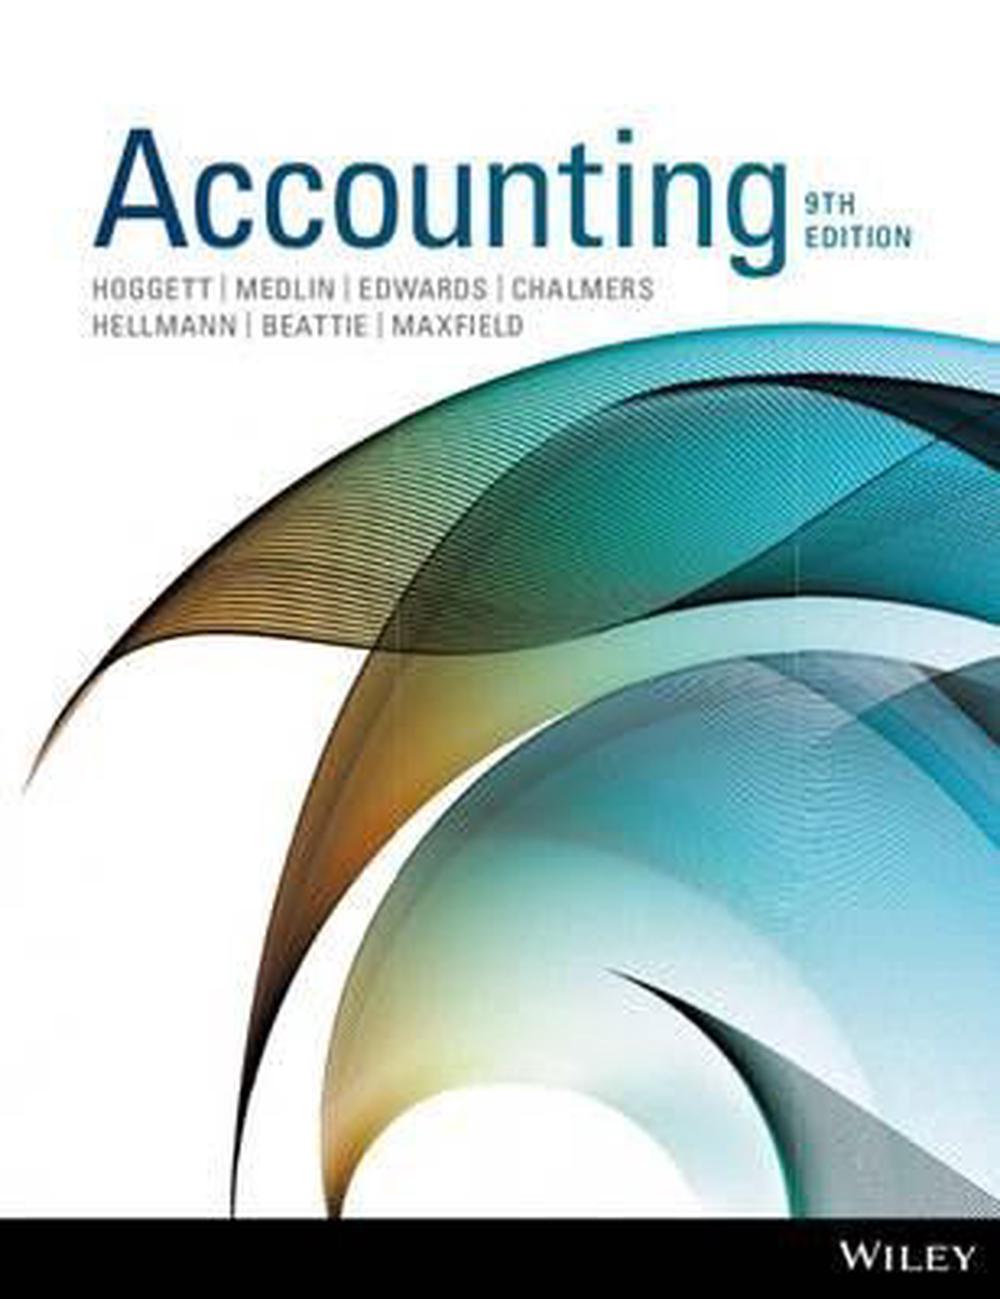 Accounting 9E+wileyplus Standalone Card, 9th Edition by Hoggett